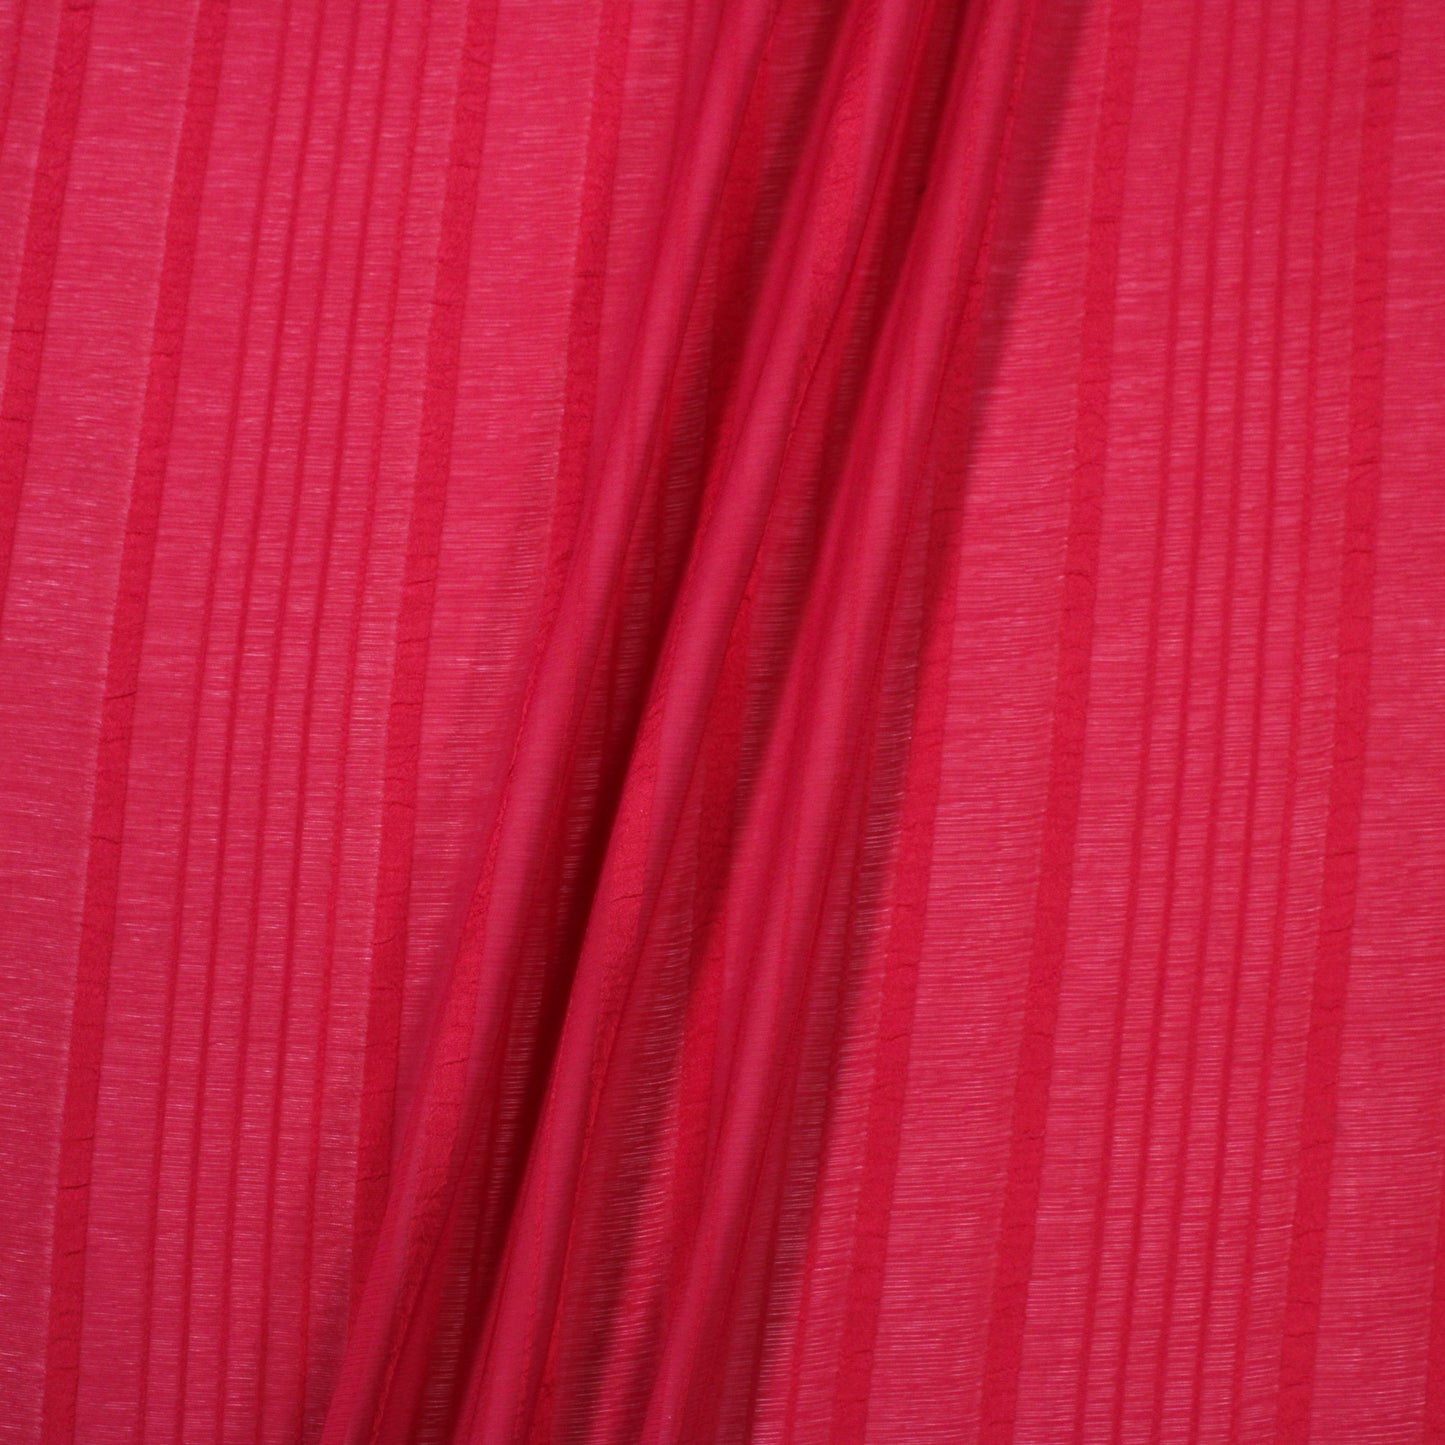 POLY STRIPED CRINKLED CHIFFON